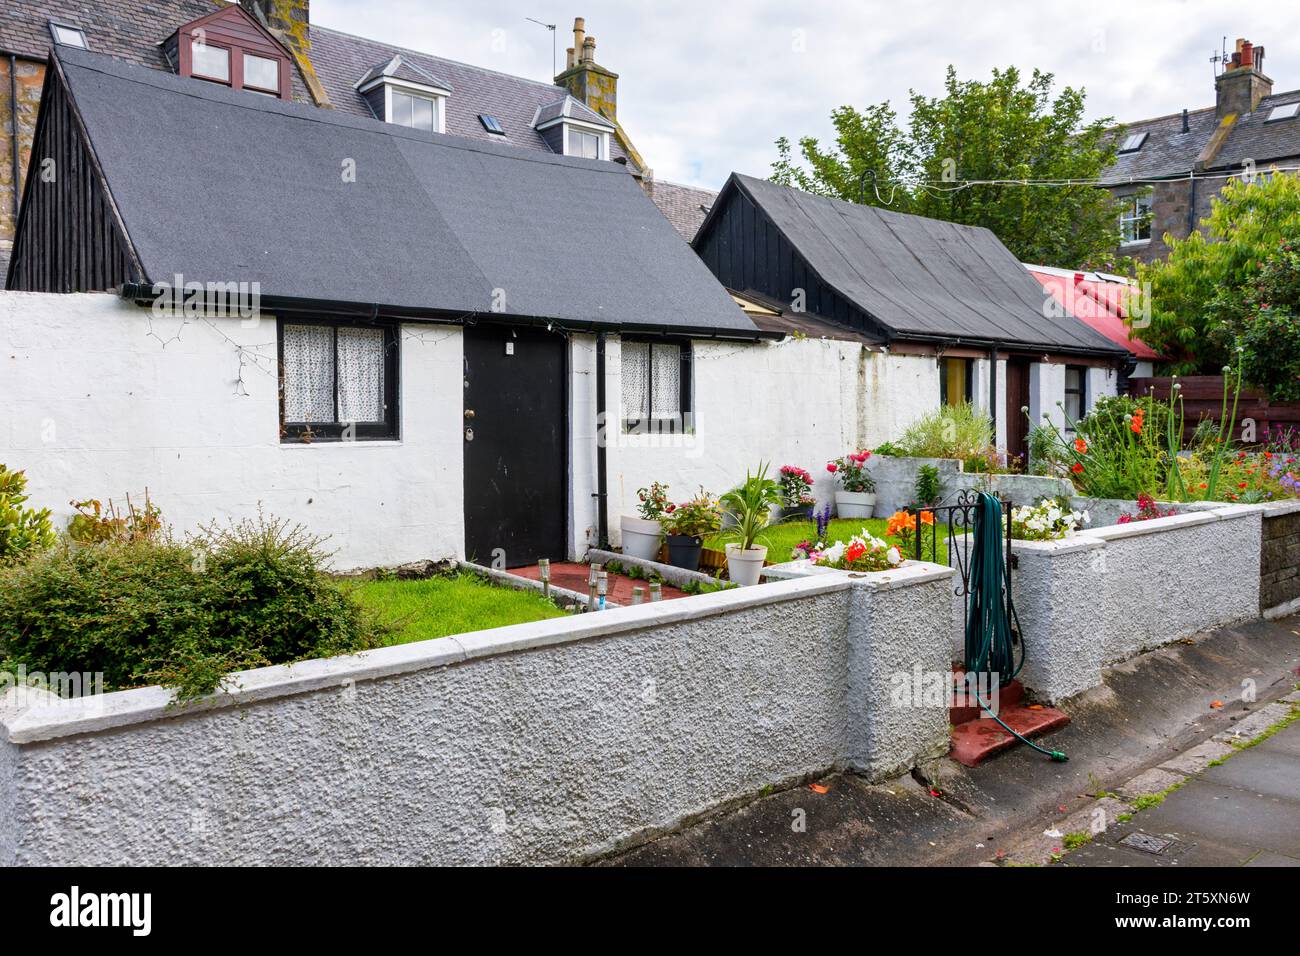 Cottages in the historic former fishing village of Footdee, The dwellings are laid out in squares with their backs to the sea.  Aberdeen, Scotland, UK Stock Photo